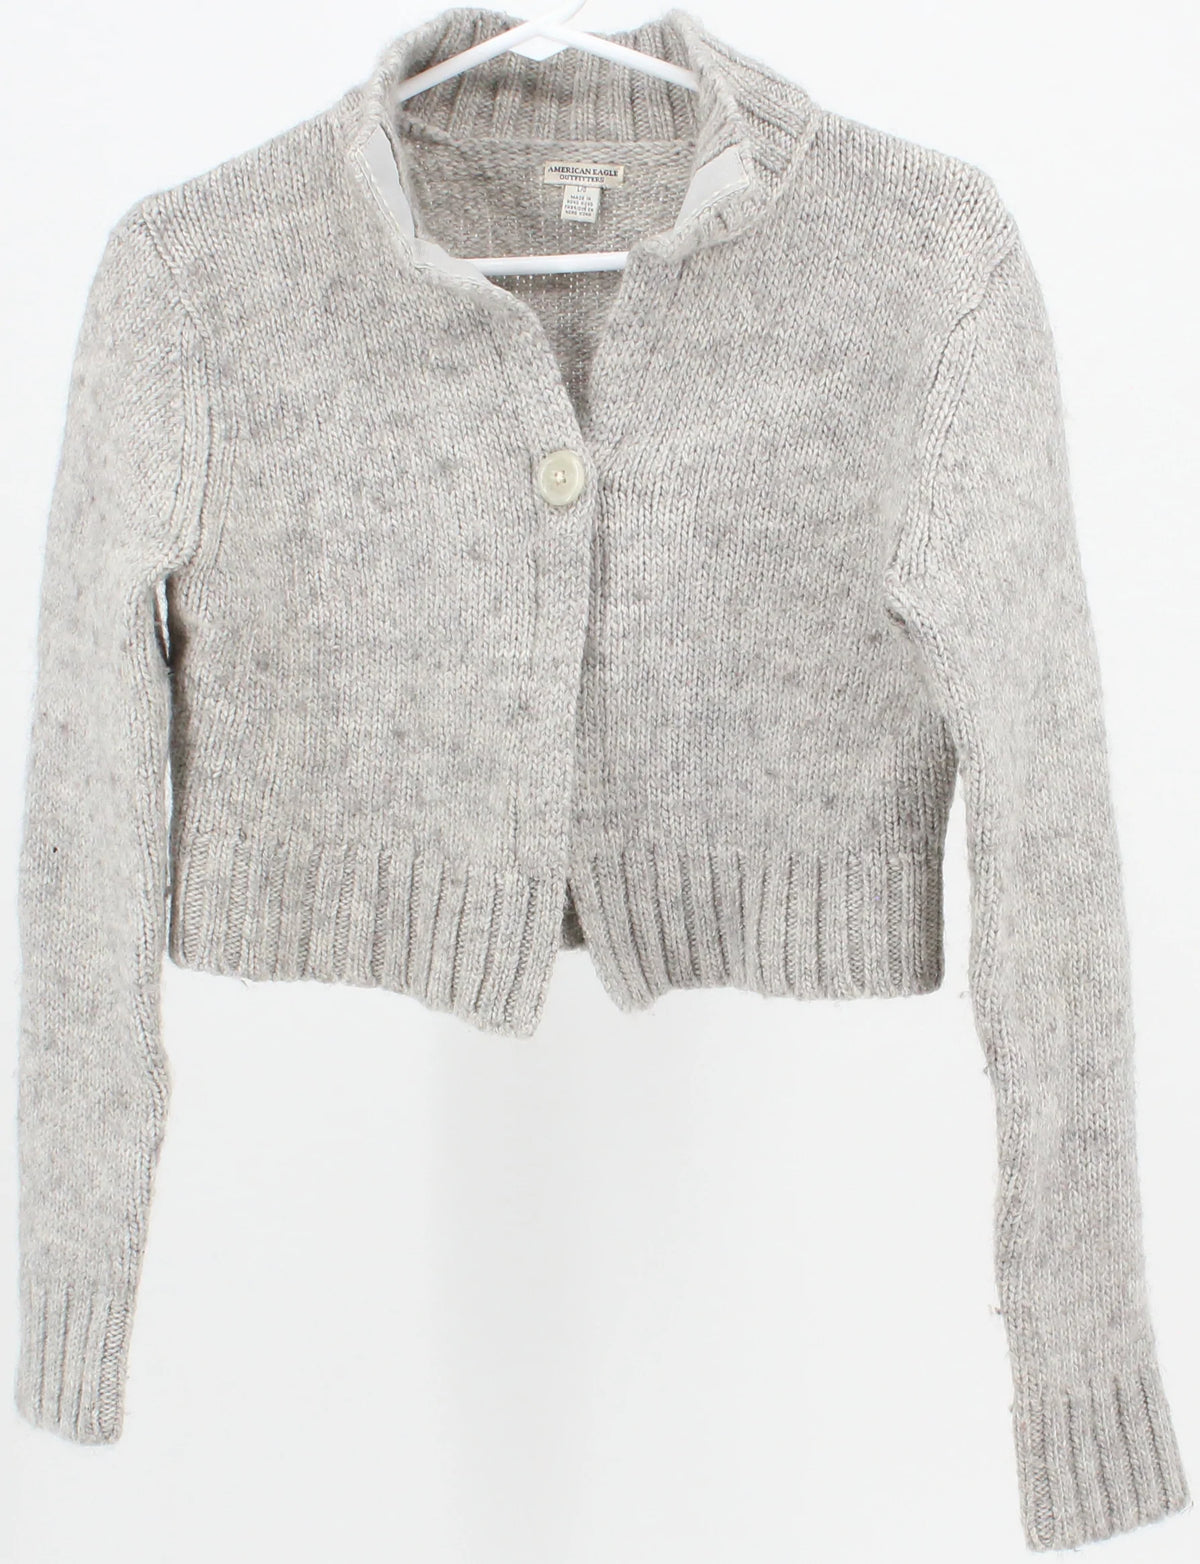 American Eagle Outfitters Grey Cropped Cardigan